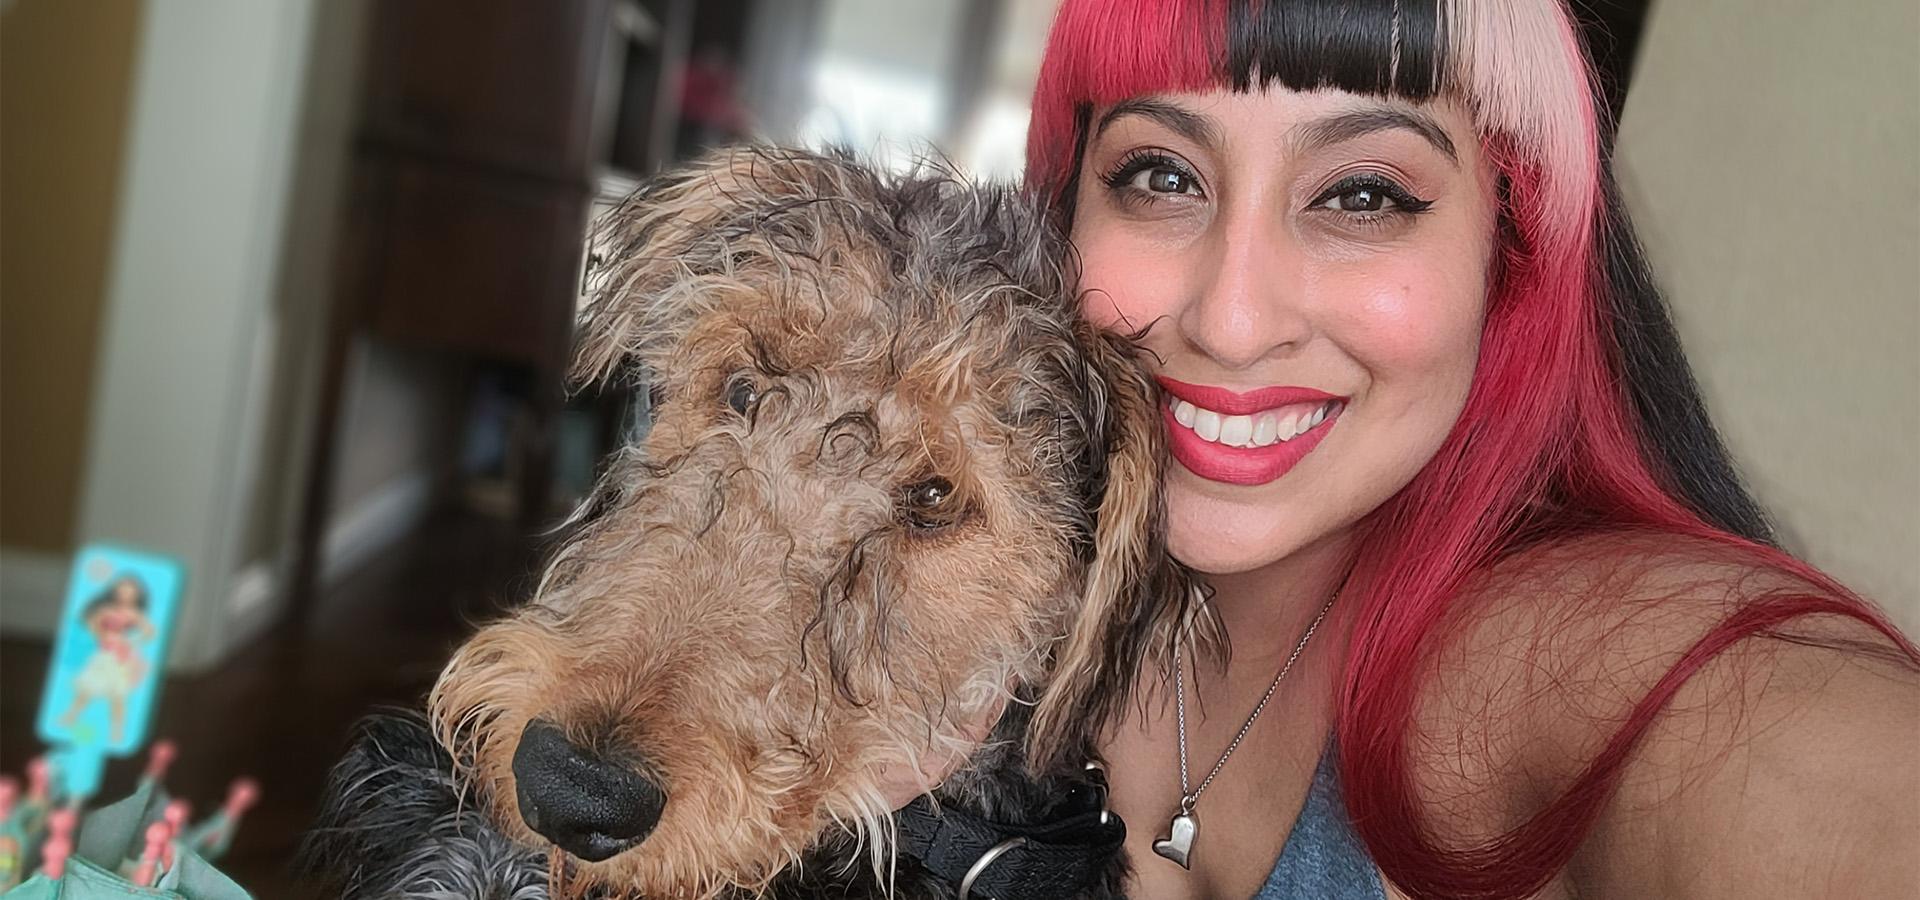 Elise Contreras poses with a dog